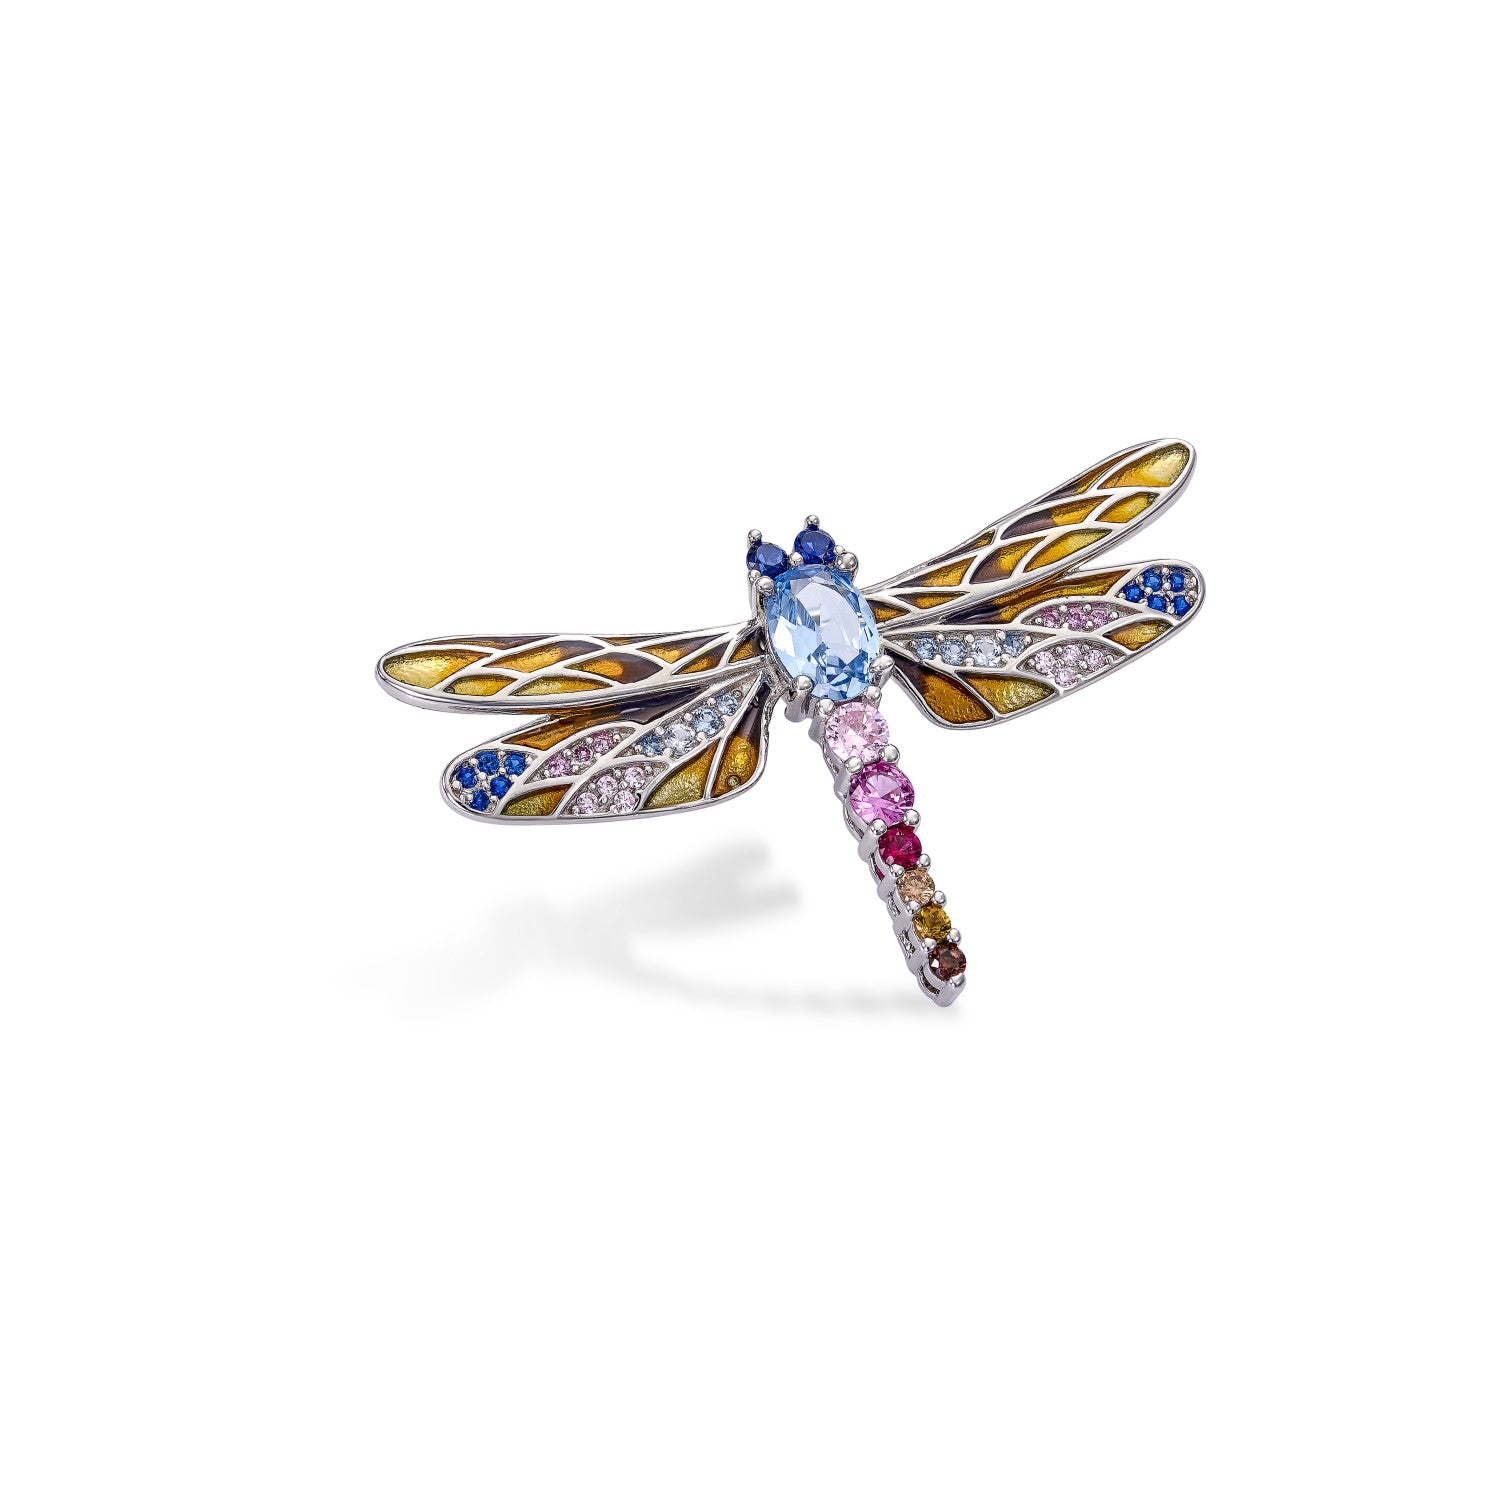 Silver brooch insect design in pink, blue and yellow tones